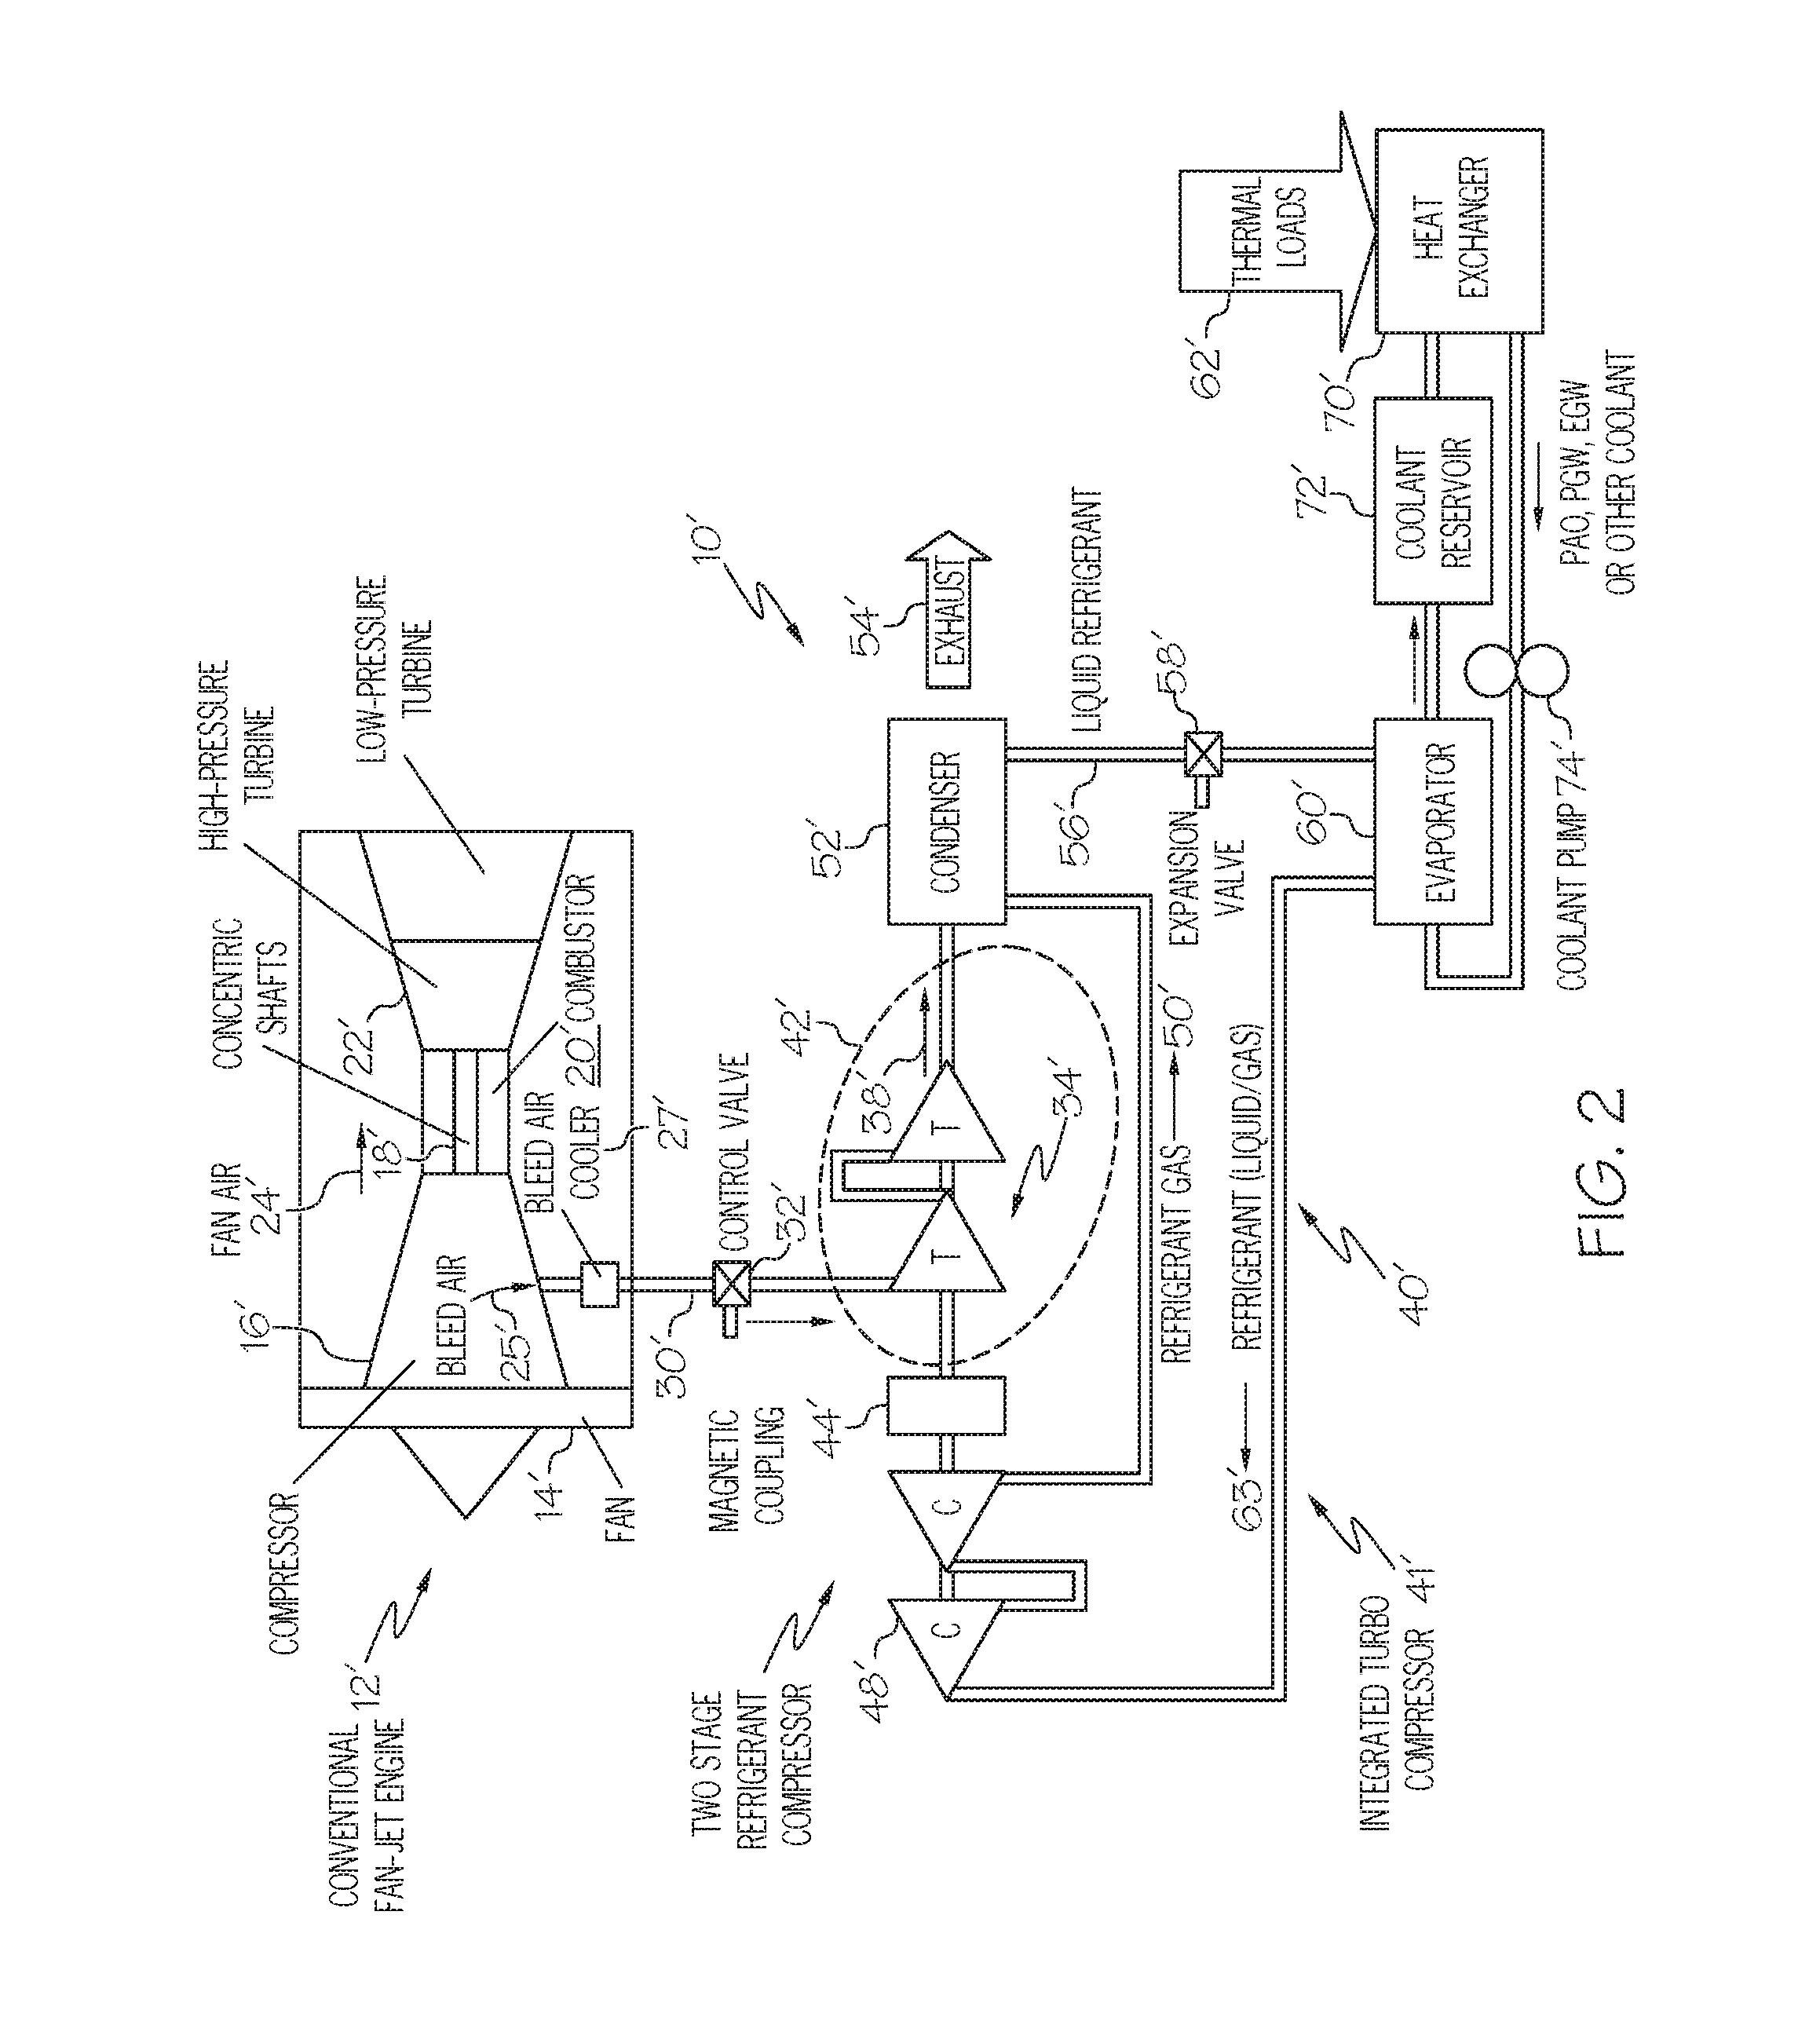 Integrated air and vapor cycle cooling system